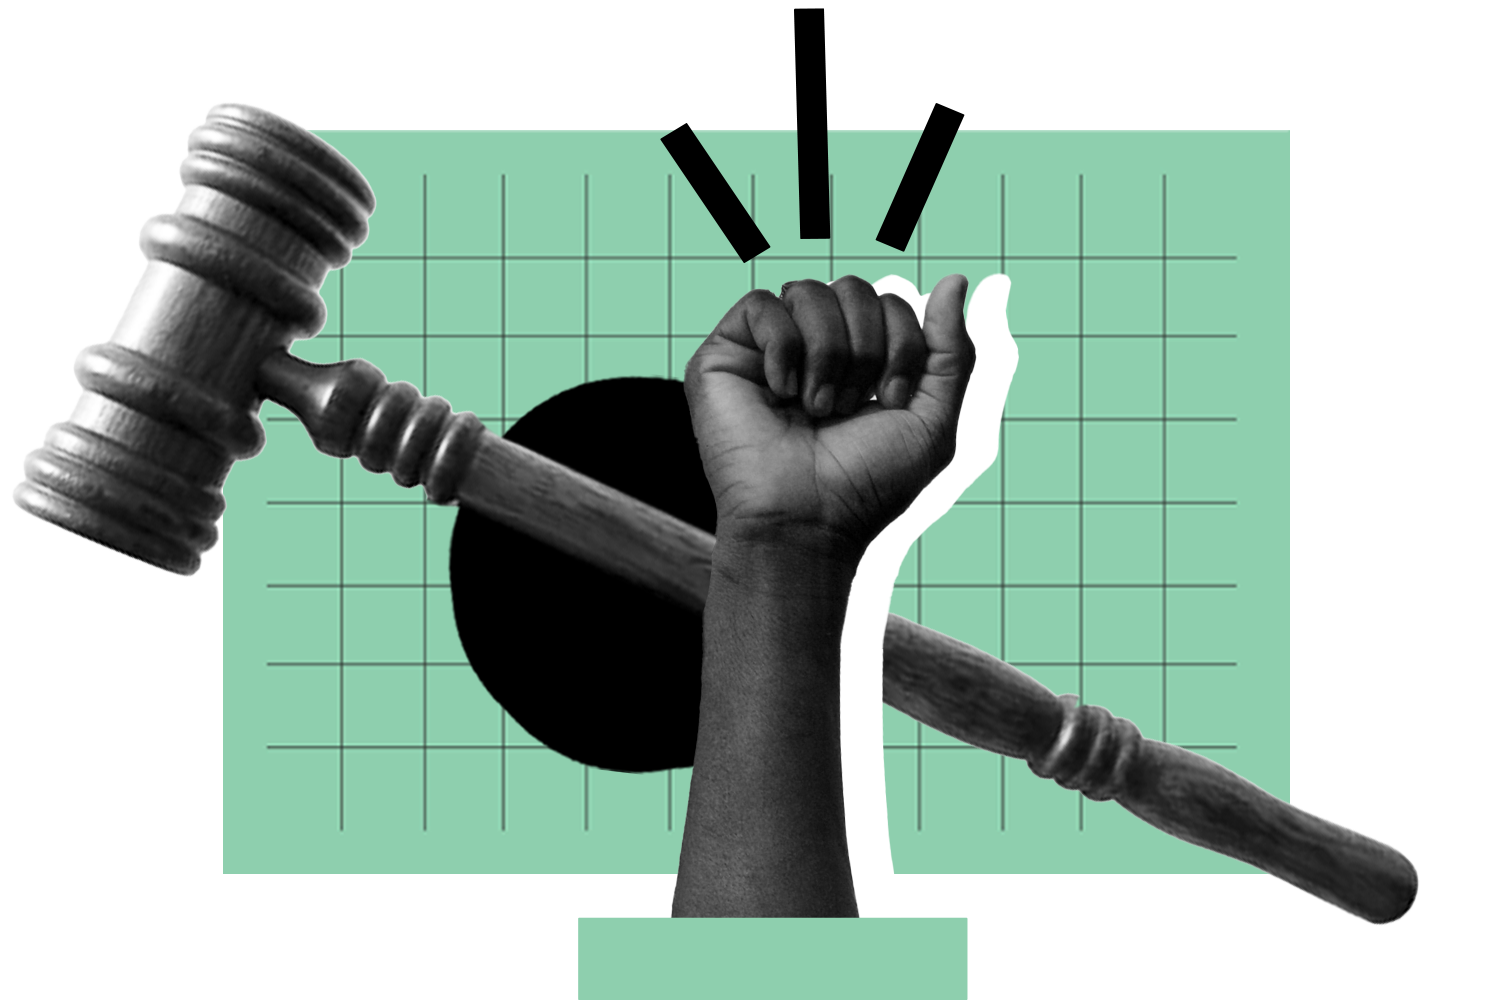 Know Your Rights approach collage. Elements include: Raised fist, gavel, and light green gridded rectangle